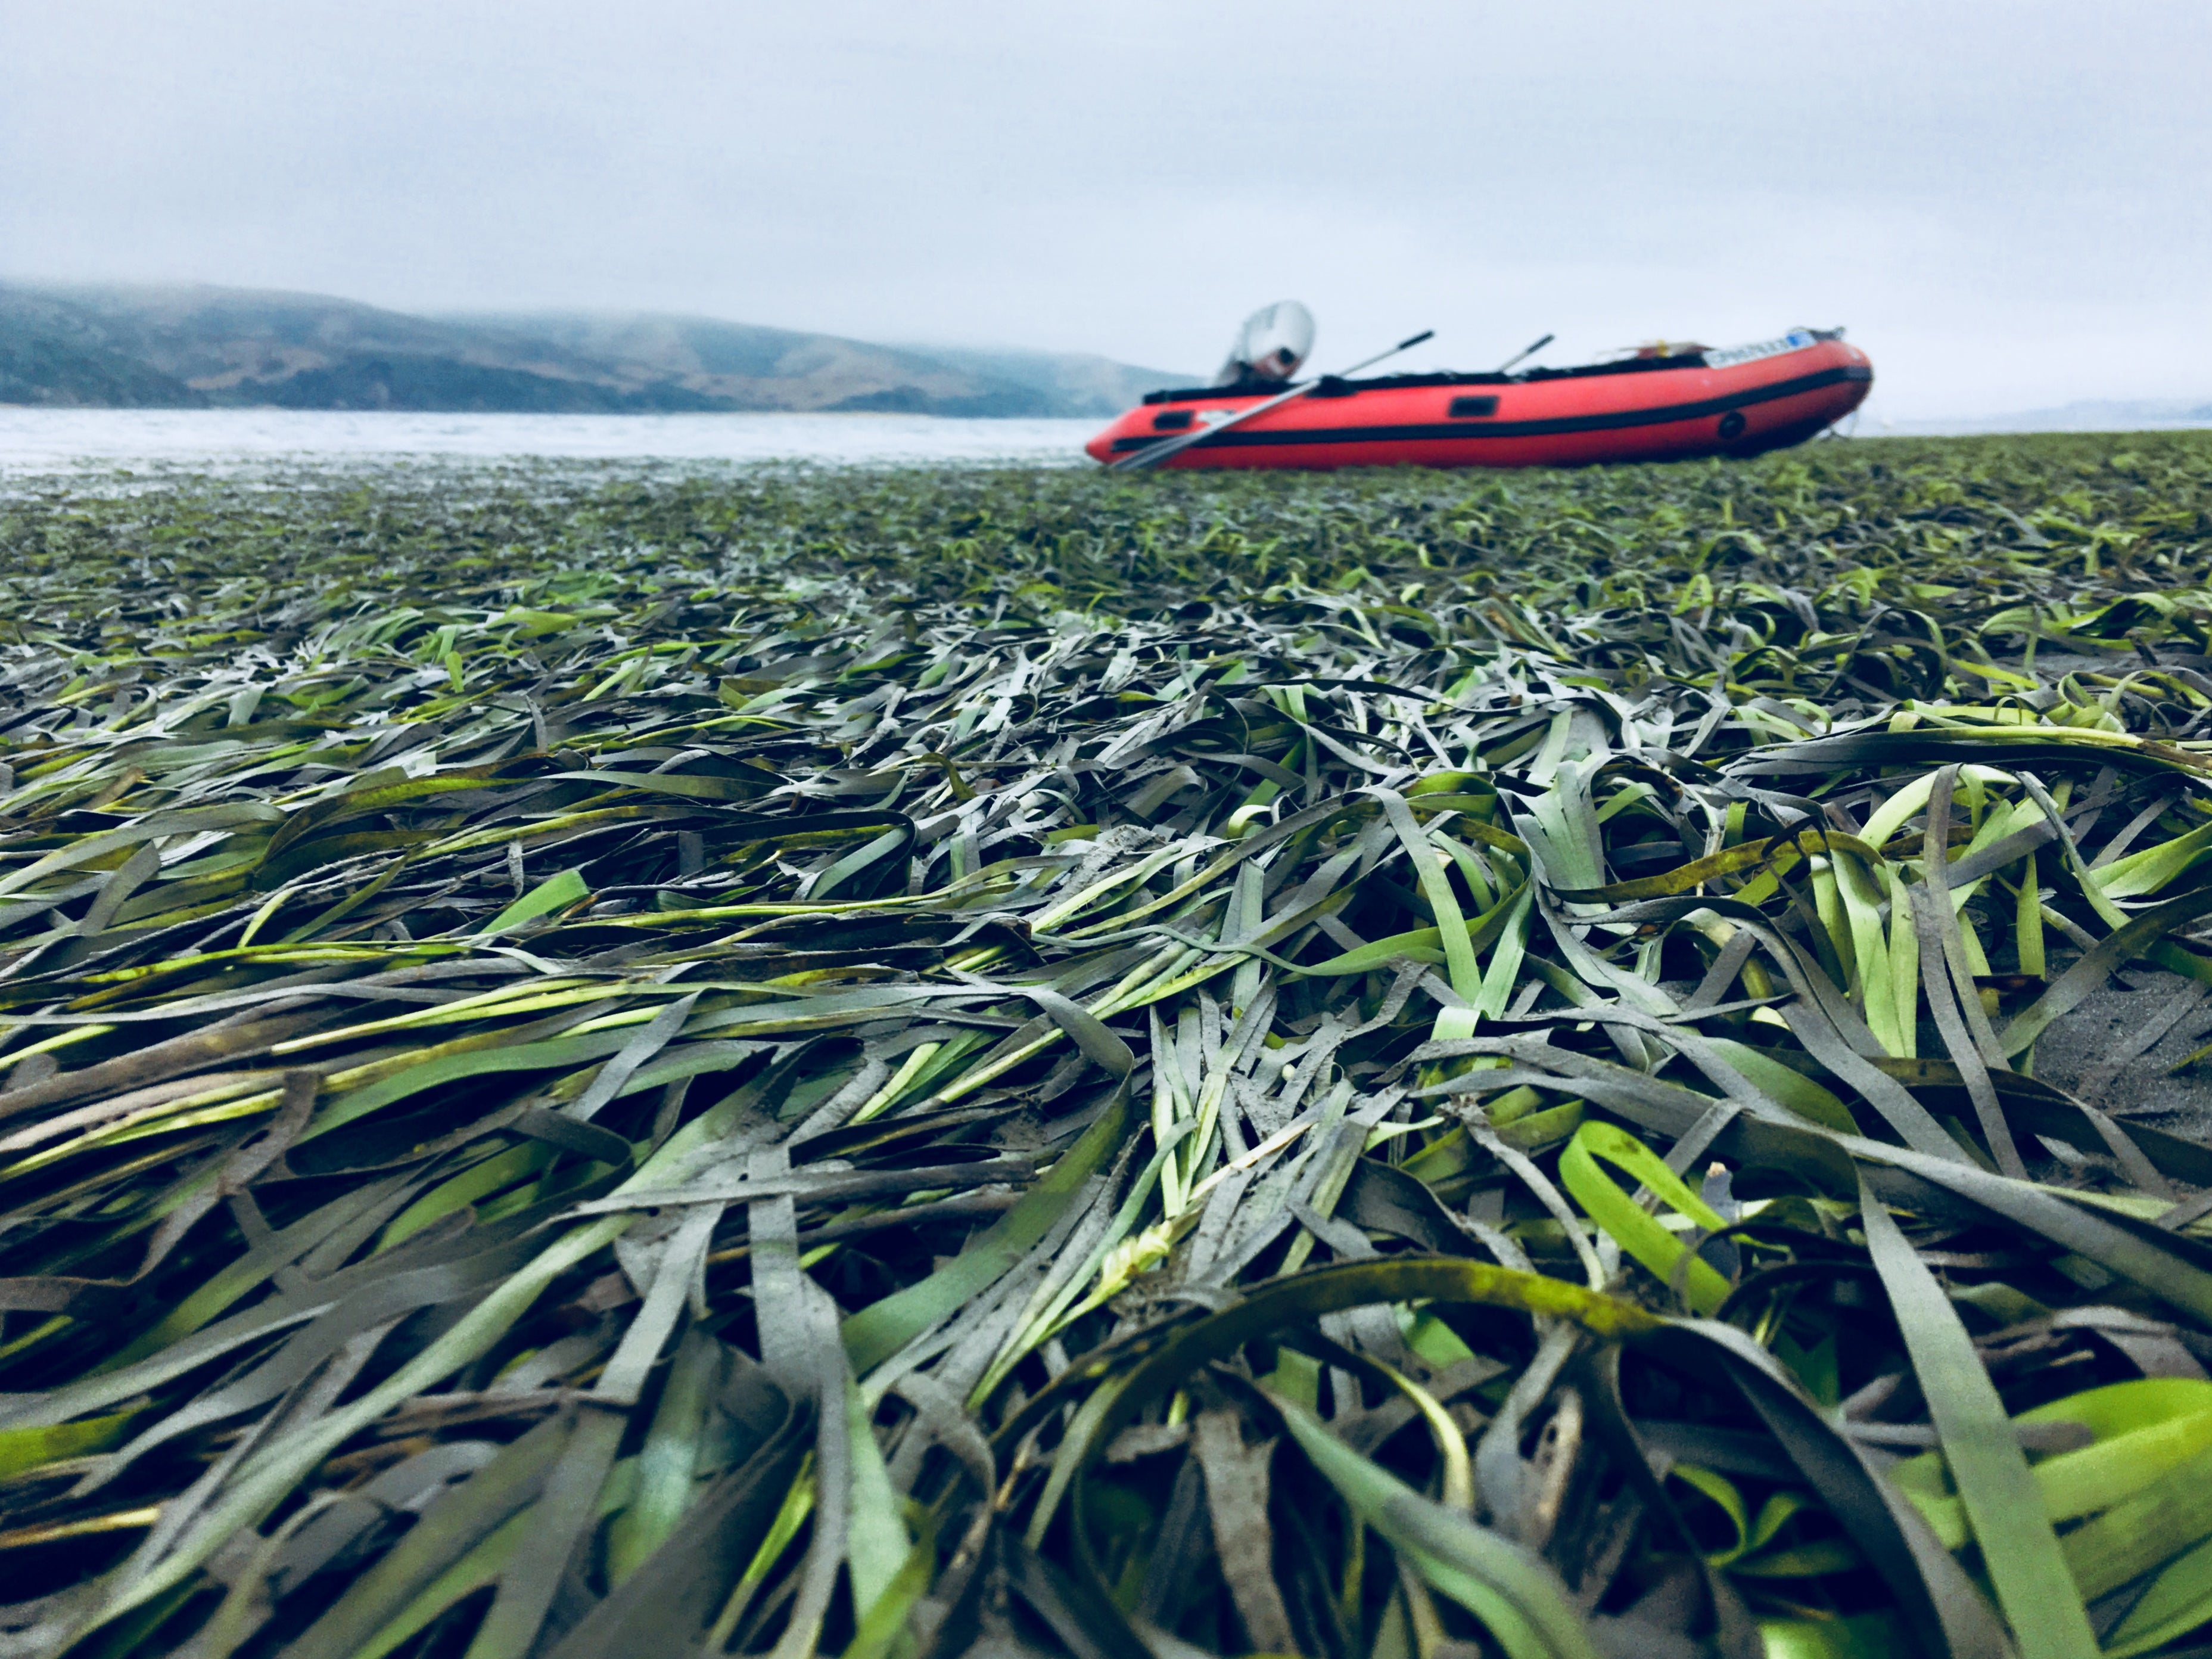 seagrasses blanket the surface of Tomales Bay with red boat in background